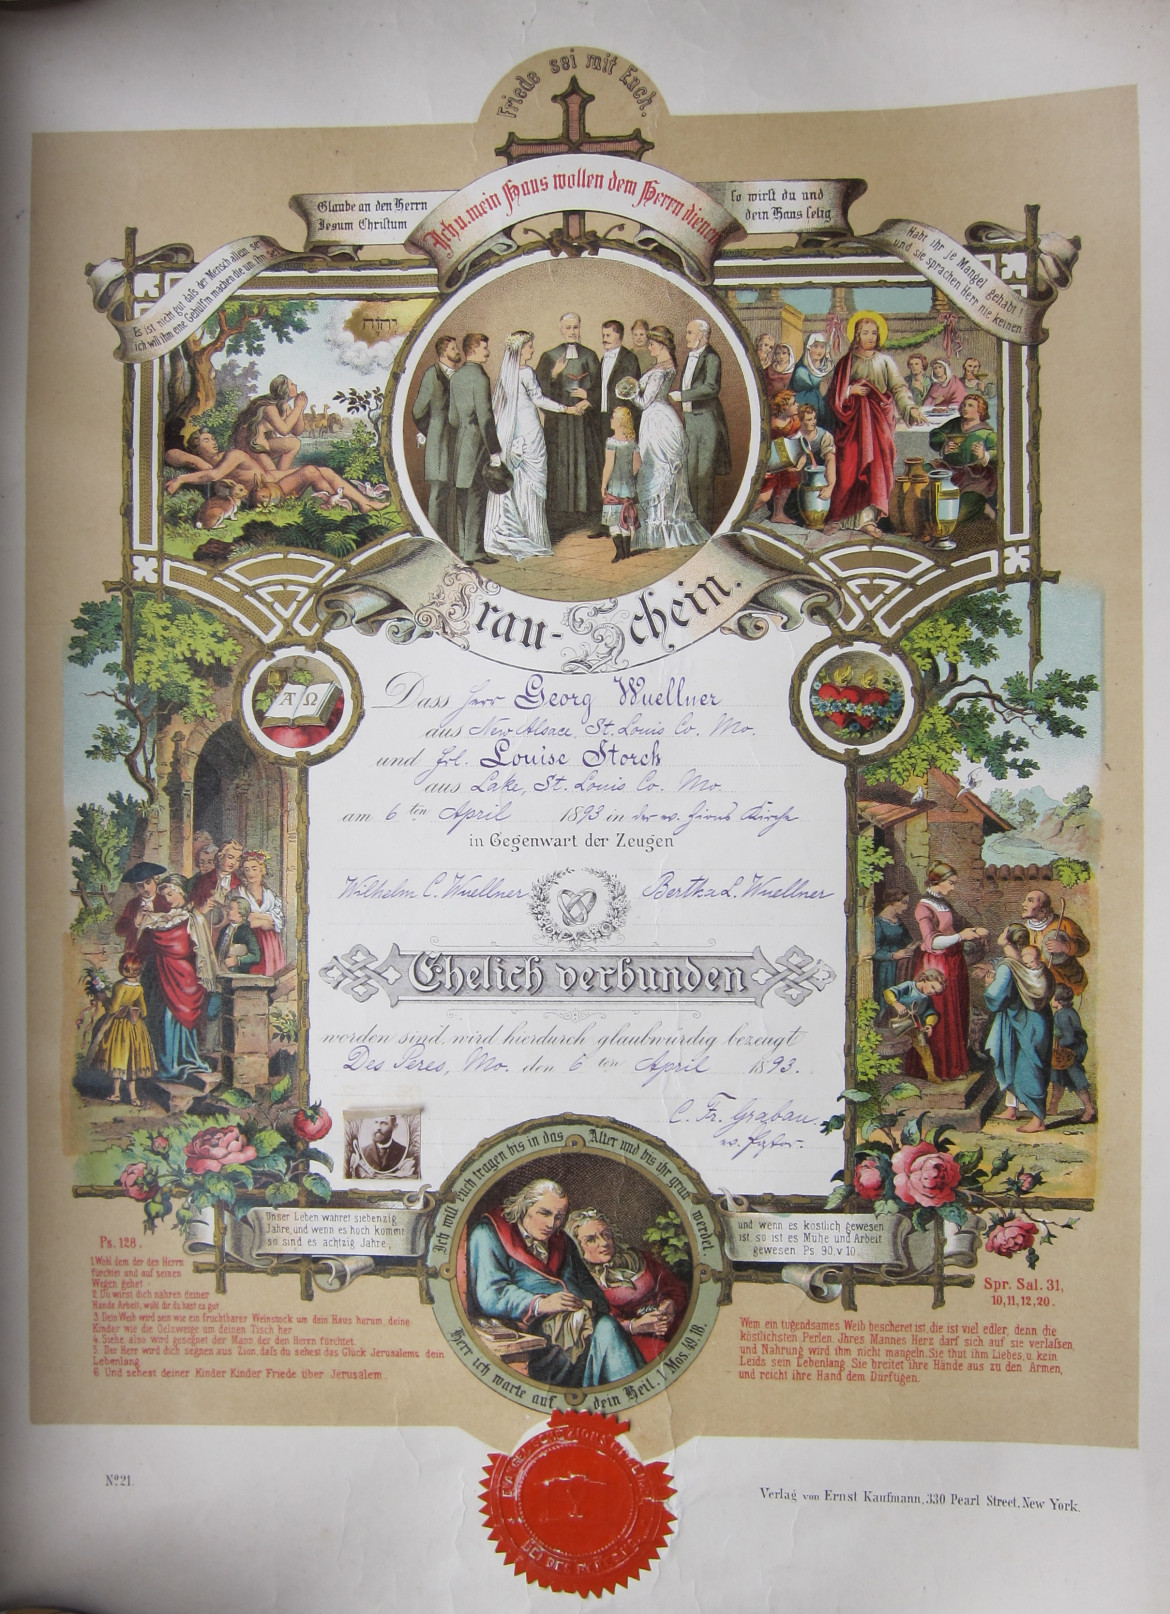 The marriage certificate of Matt's great-great grandparents, Georg Wuellner and Louise Storch.